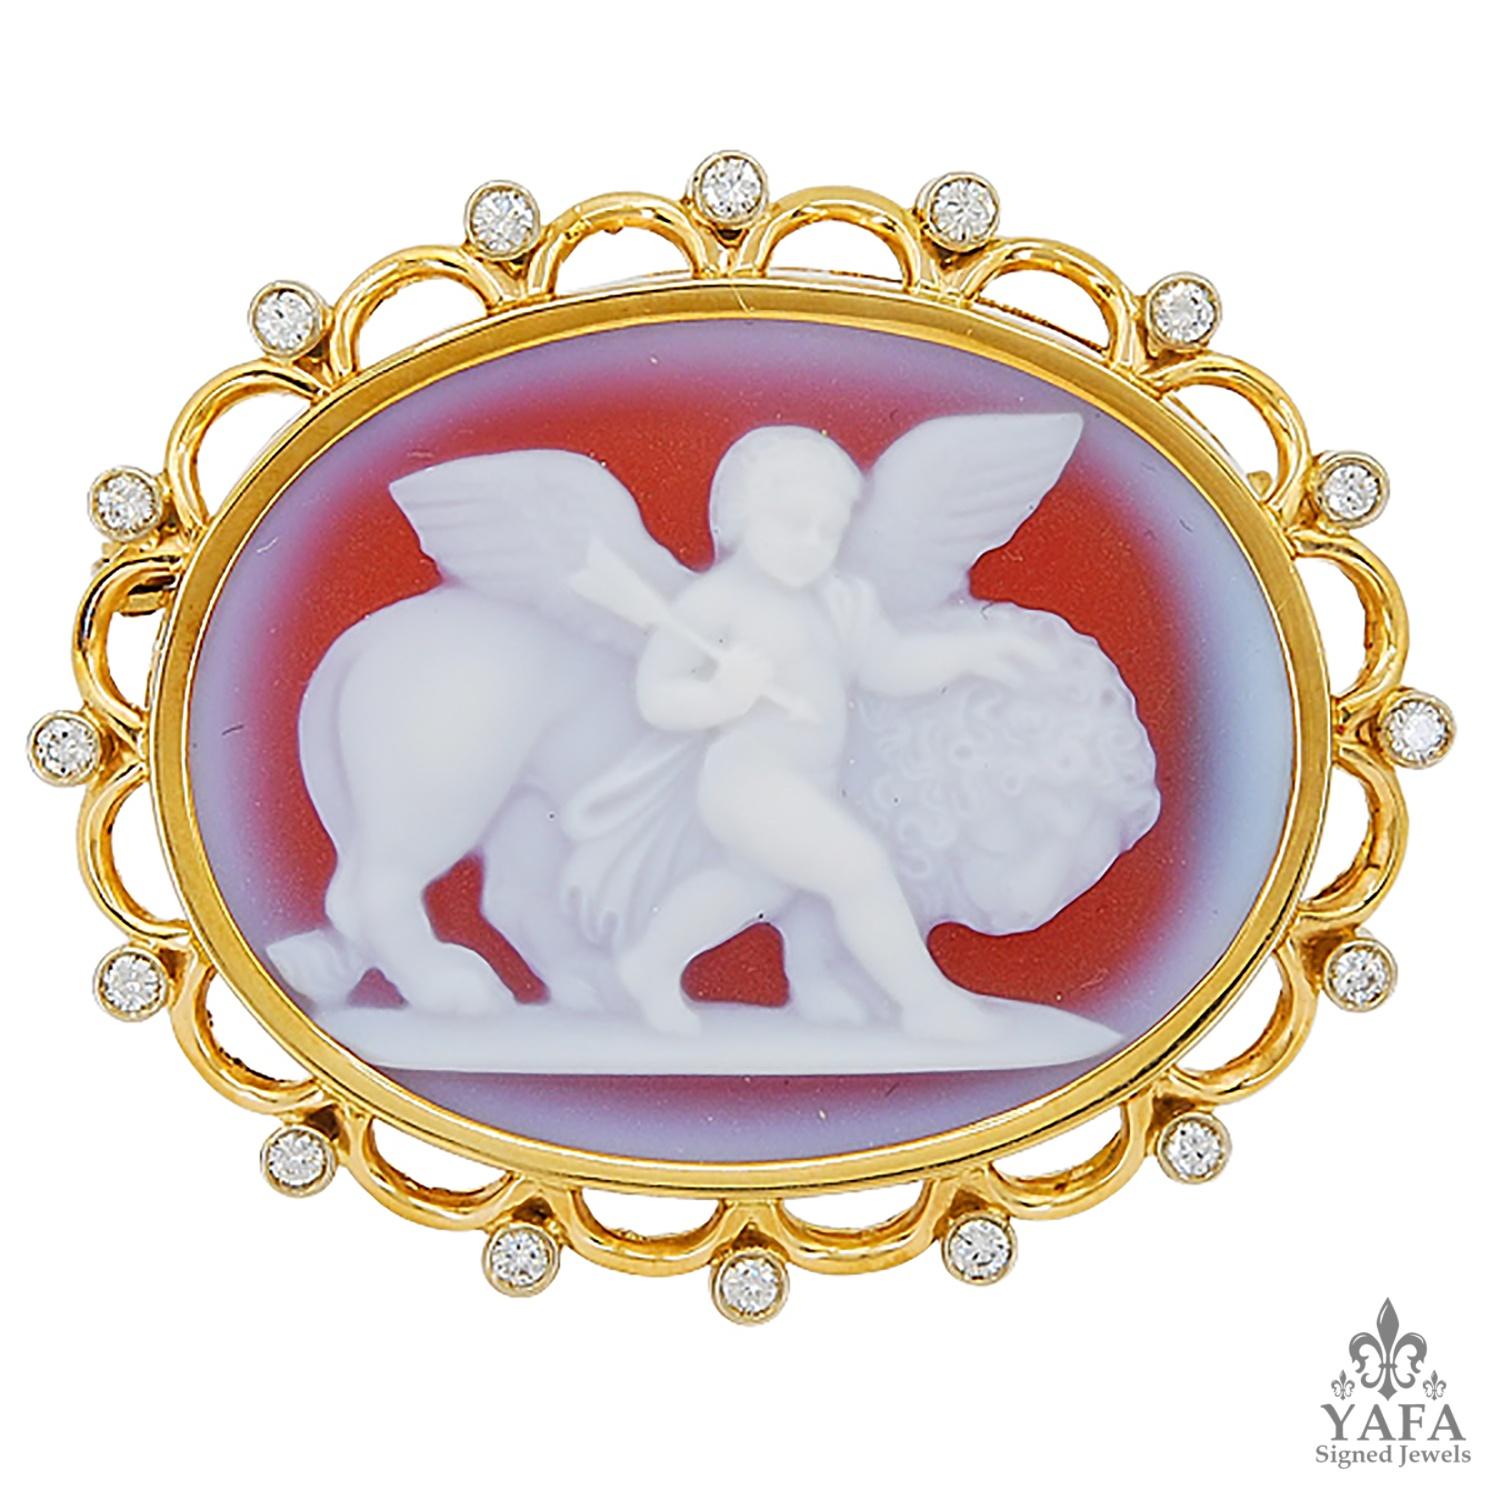 An Italian two-toned cameo brooch by Nardi featuring a gold scalloped halo, finished with meticulously-spaced round diamonds that frame the outer edge. Although this cameo dates from the 1980s, it is a nod to Victorian brooches which often paid